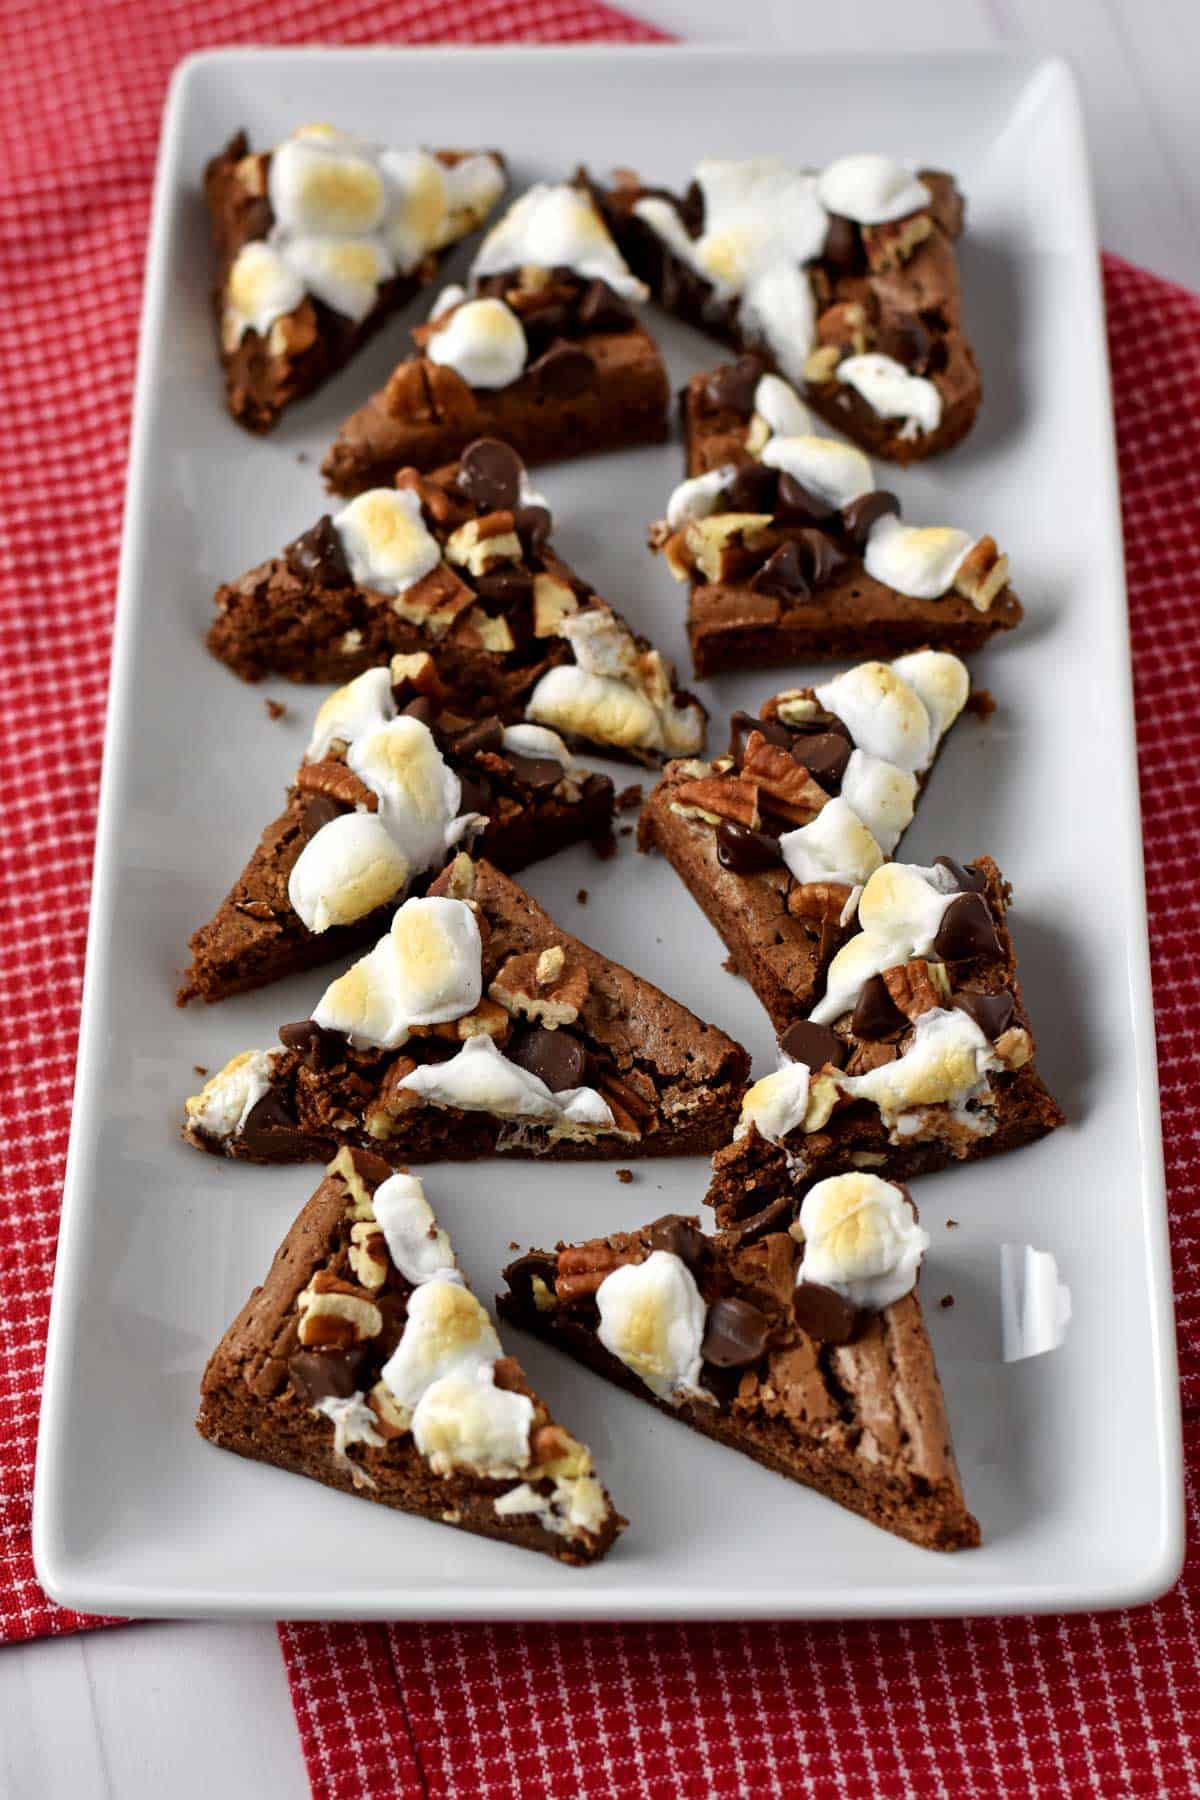 A platter of gf rocky road brownies on a red and white checked kitchen towel.